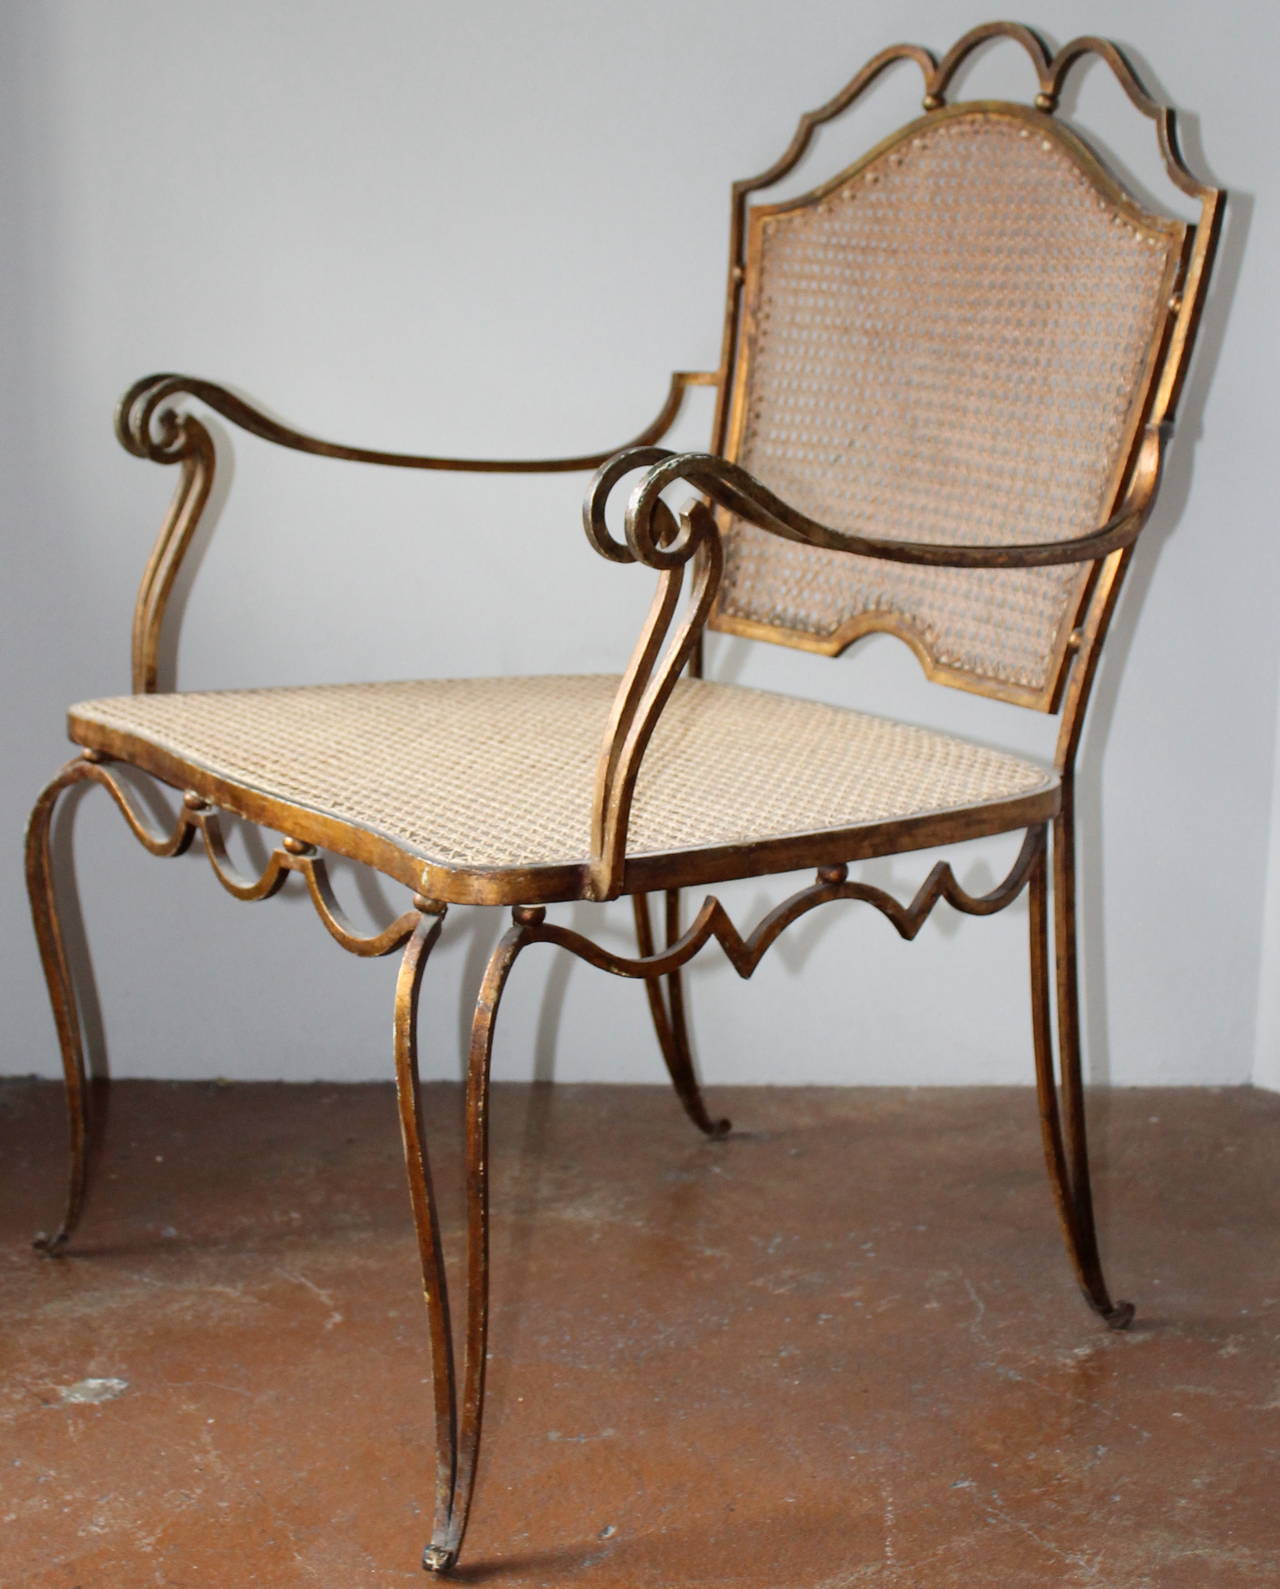 Mexican Rare Set of Four Arturo Pani Gilded Iron Armchairs, Mexico City, 1940s For Sale